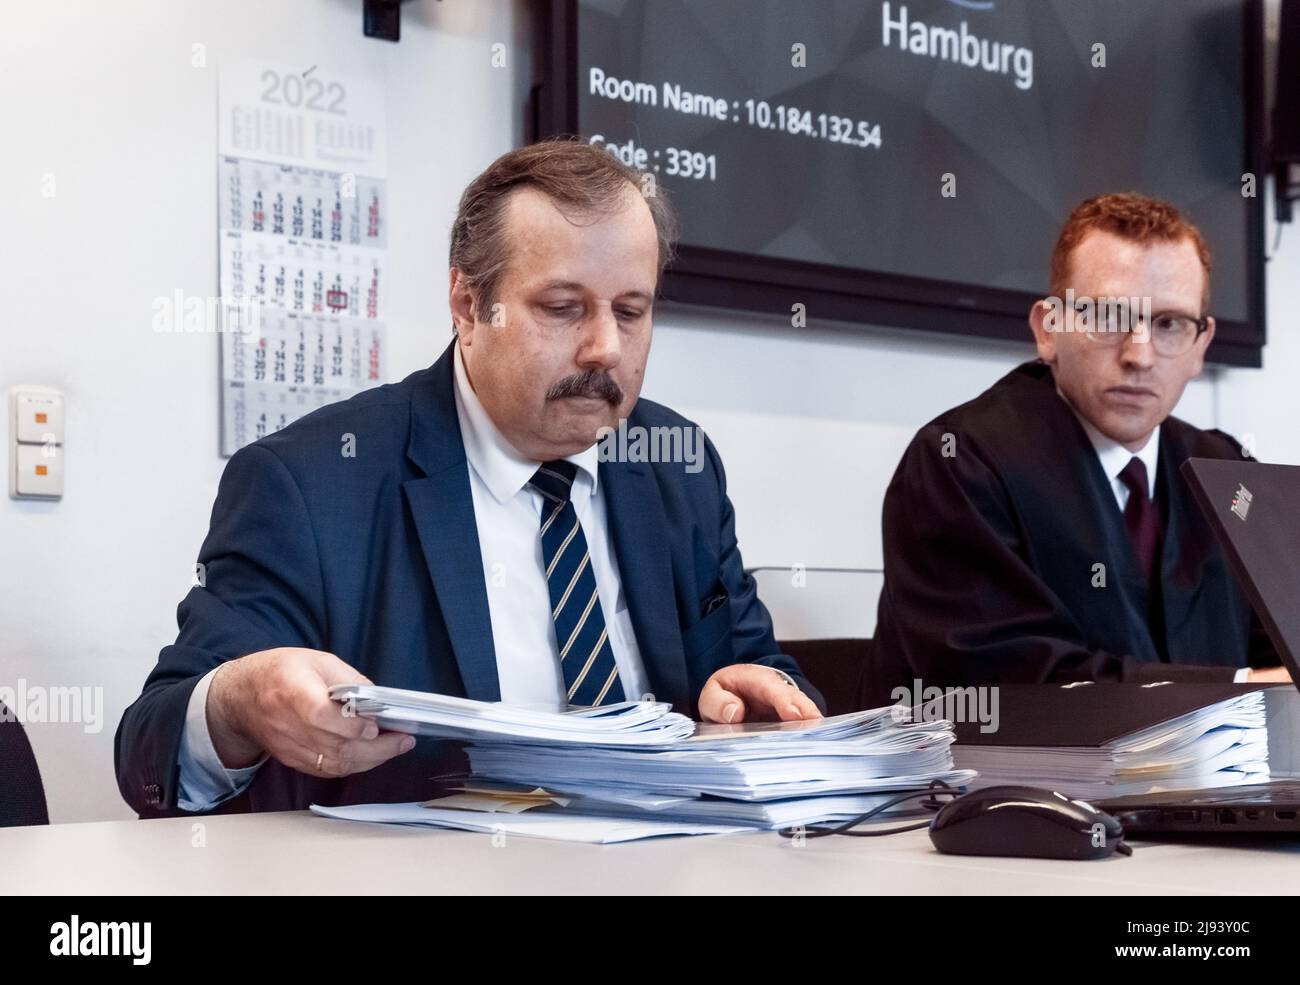 20 May 2022, Hamburg: Physicist Roland Wiesendanger (l) sits next to his lawyer Lucas Brost in a hall of the Hamburg Civil Justice Building before the oral hearing in the dispute over the origin of the corona virus between him and virologist Drosten. In an interview, the Hamburg nanoscientist accused Drosten, director of the Institute of Virology at Berlin's Charité hospital, of deliberately deceiving society about the origin of the corona pandemic. Drosten had obtained an injunction against the repetition of this claim, against which Wiesendanger filed an appeal. Photo: Markus Scholz/dpa Stock Photo